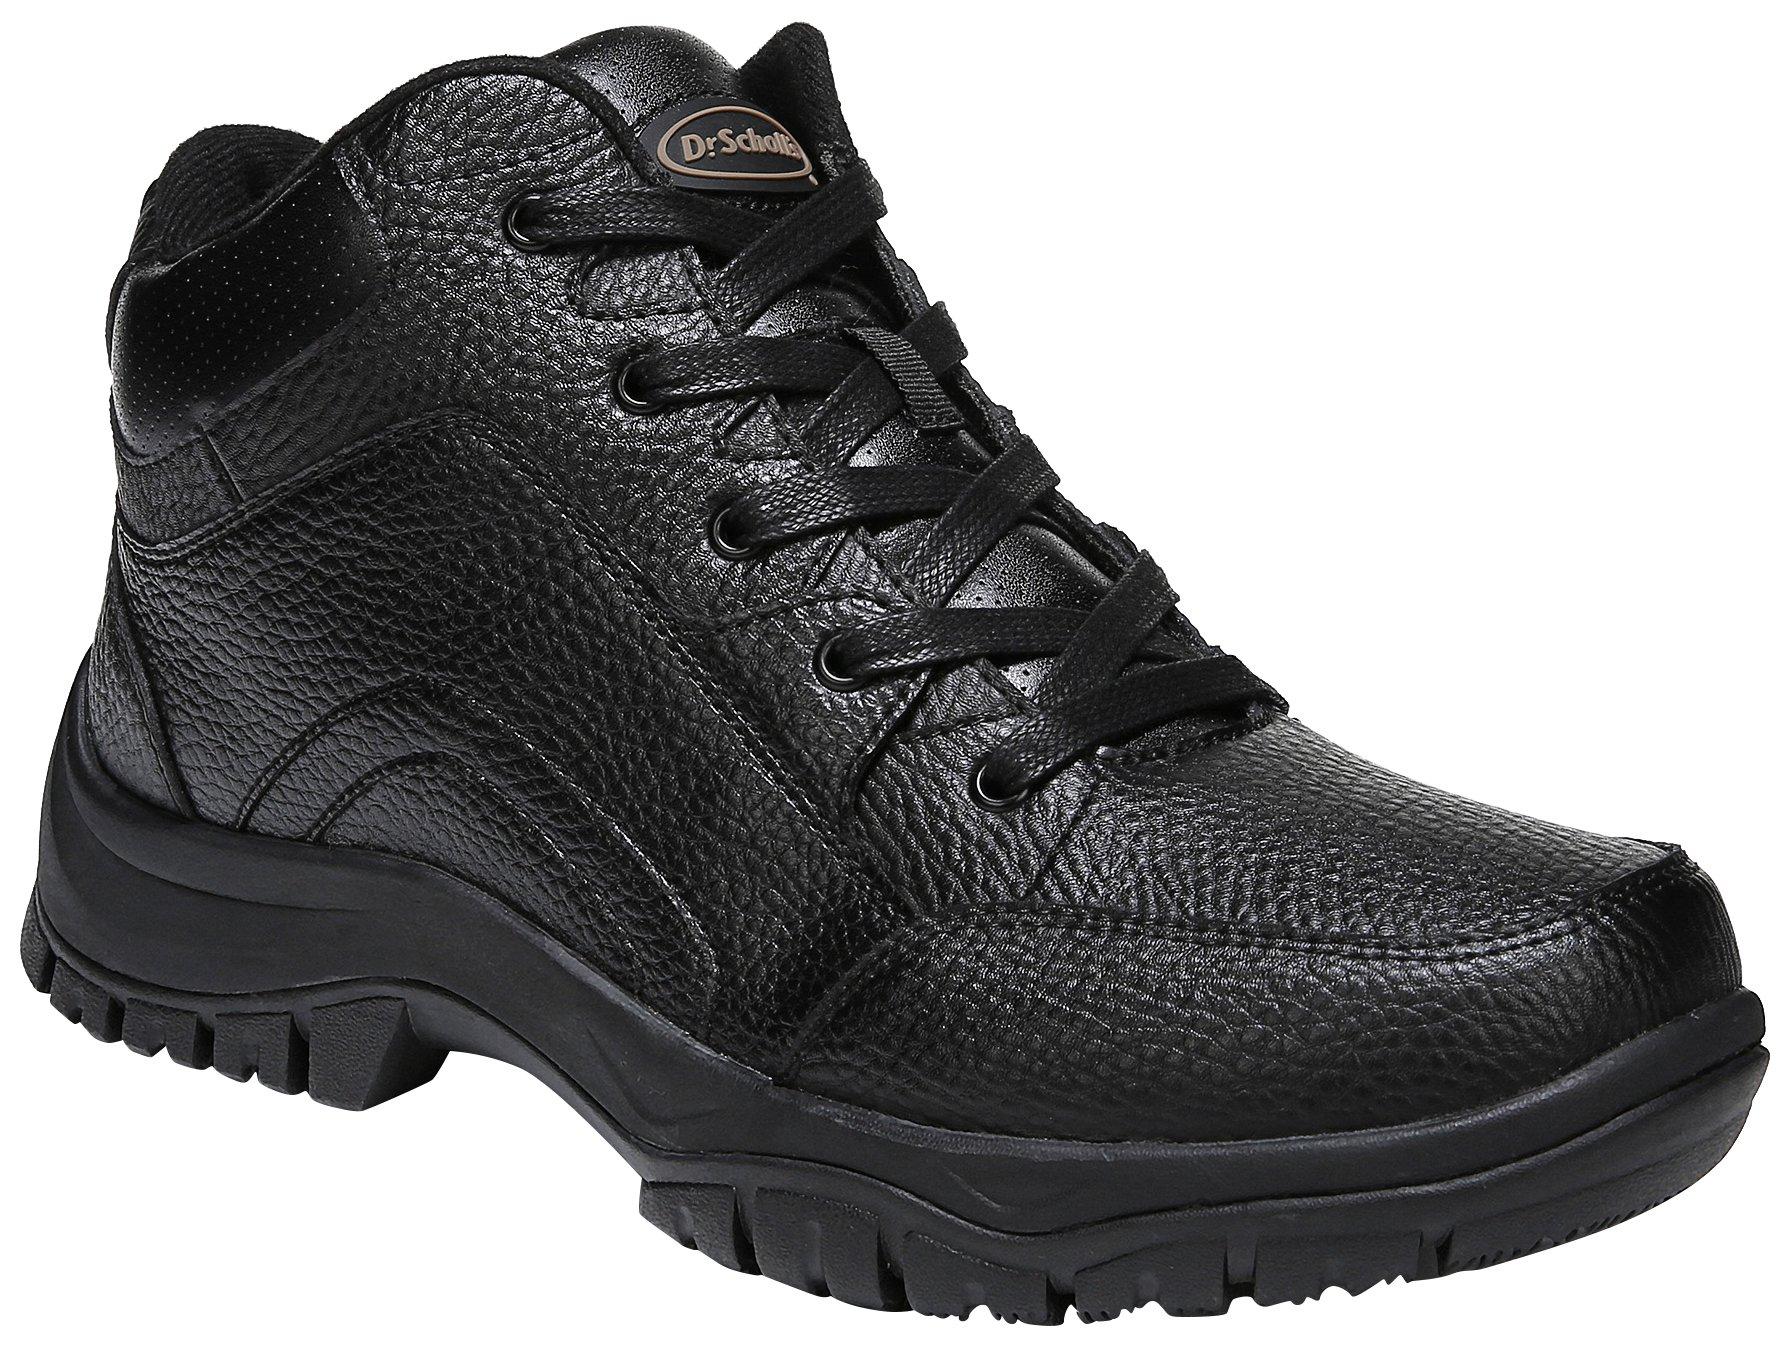 Dr. Scholl's Mens Charge Work Boots